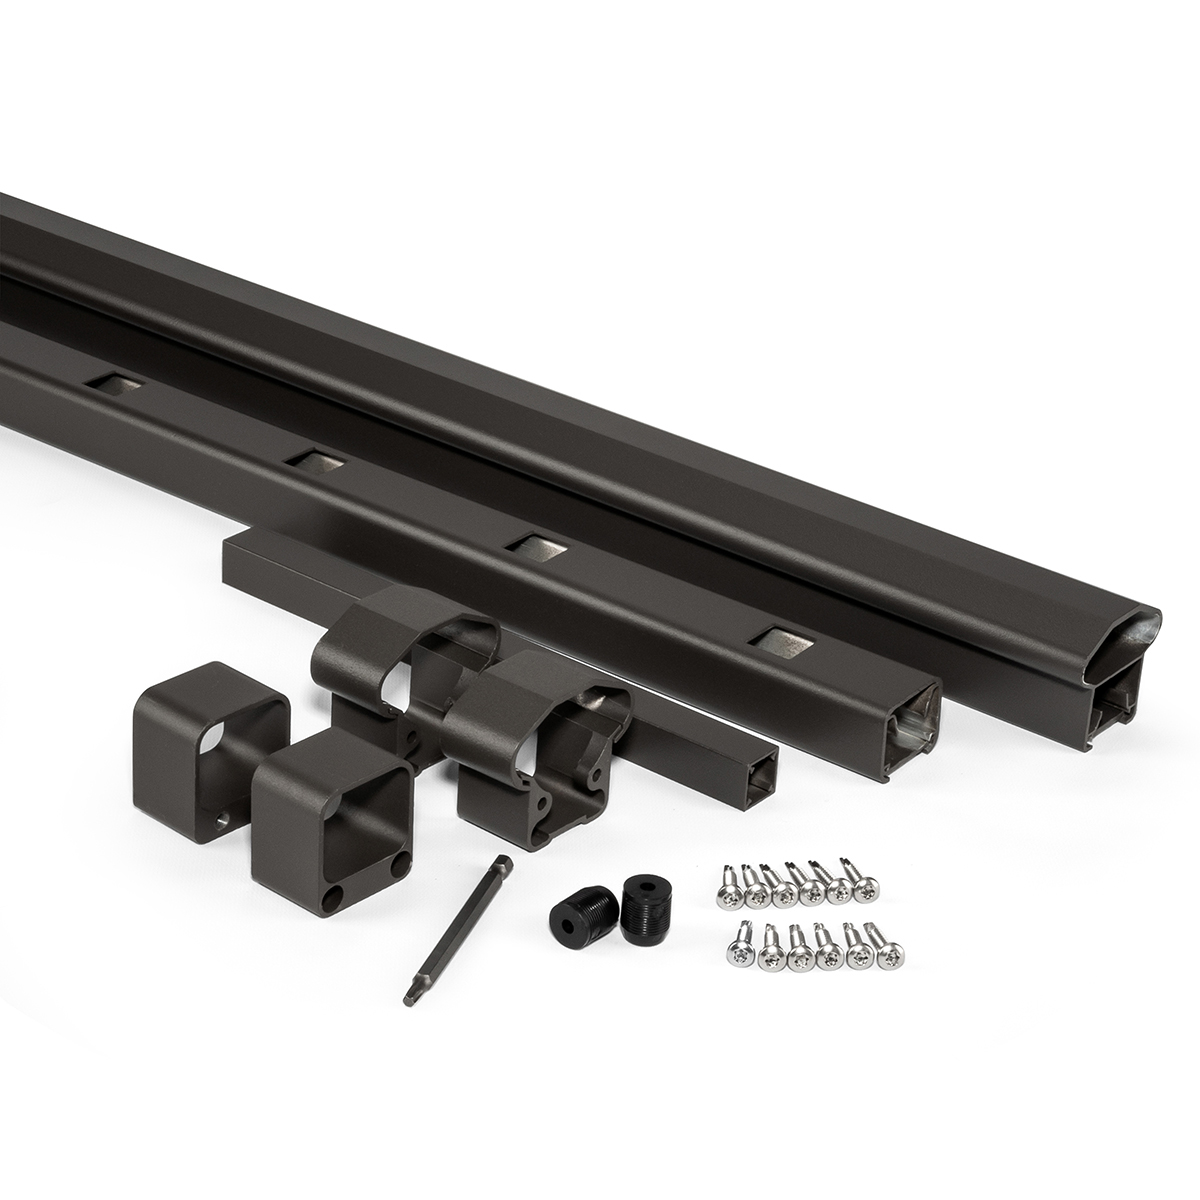 The contents of an AFCO Pro Level Rail Kit for metal deck railing